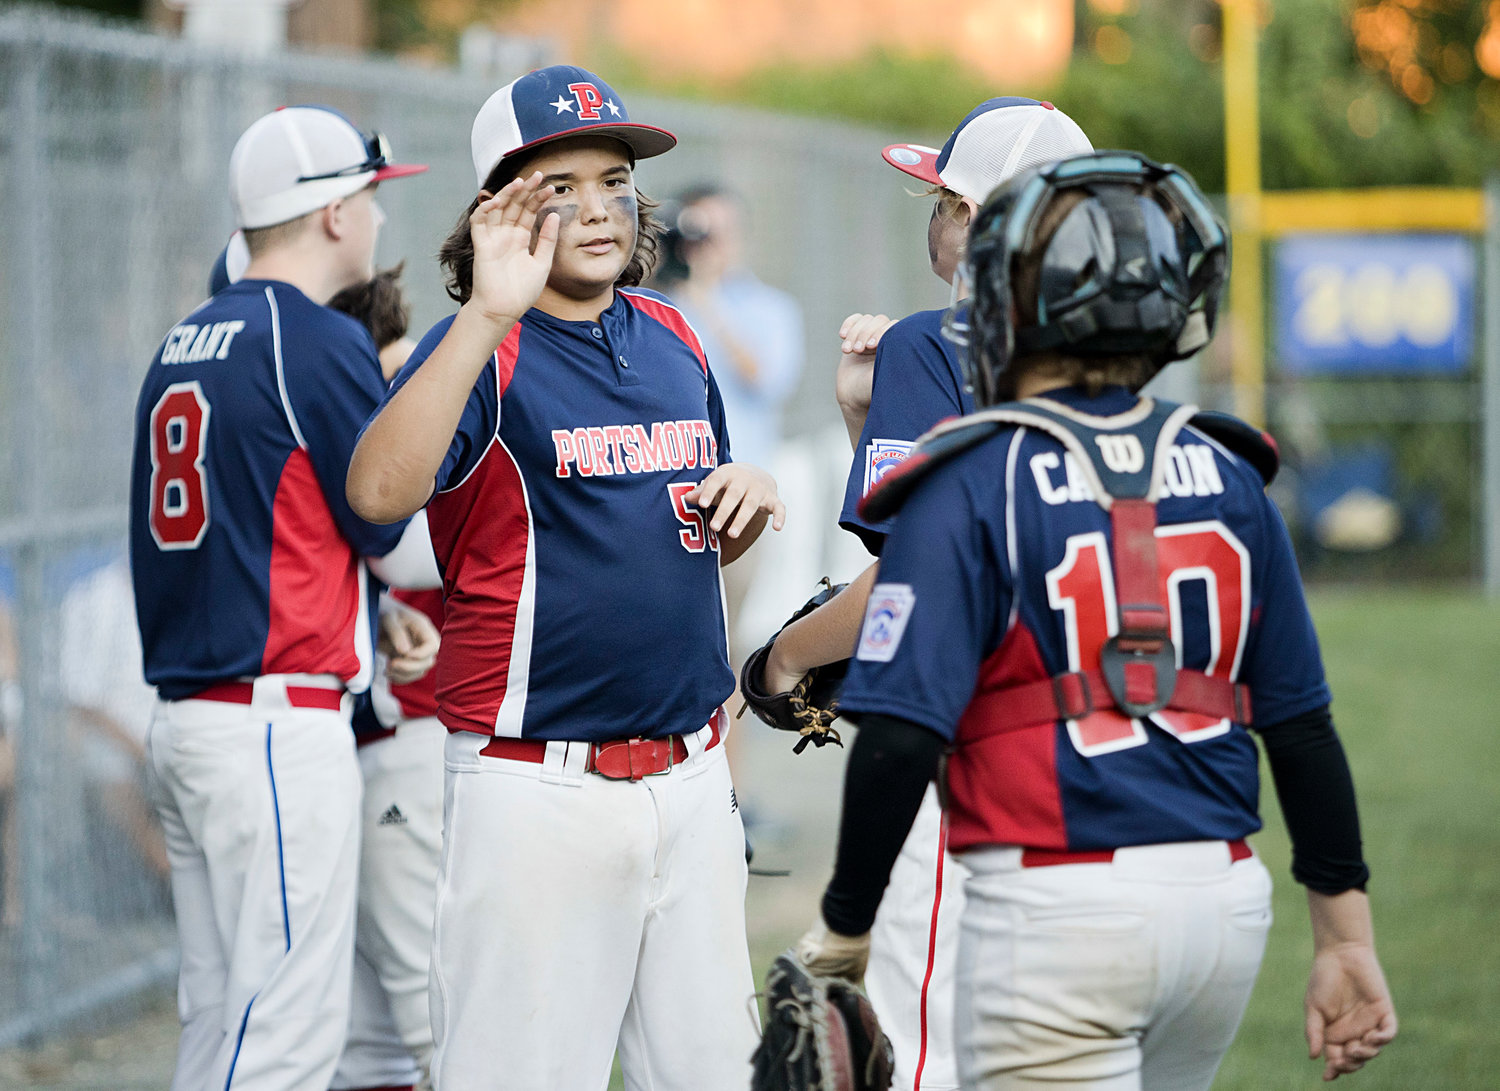 Brady Fanning congratulates his teammates as they come off of the field after a successful inning against Cumberland.